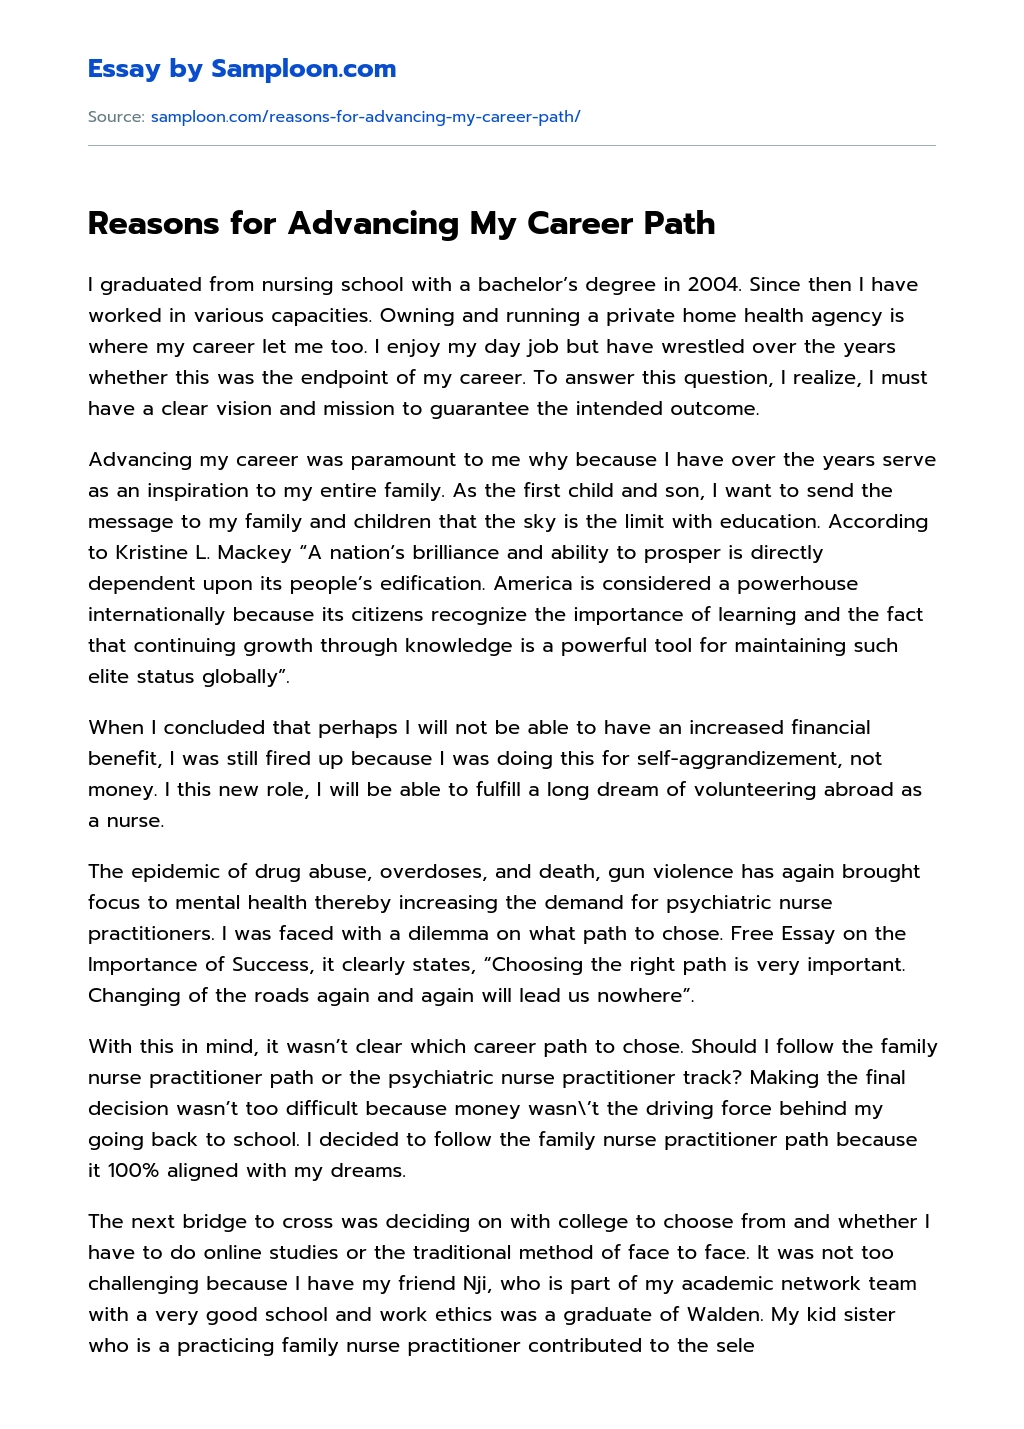 Reasons for Advancing My Career Path essay